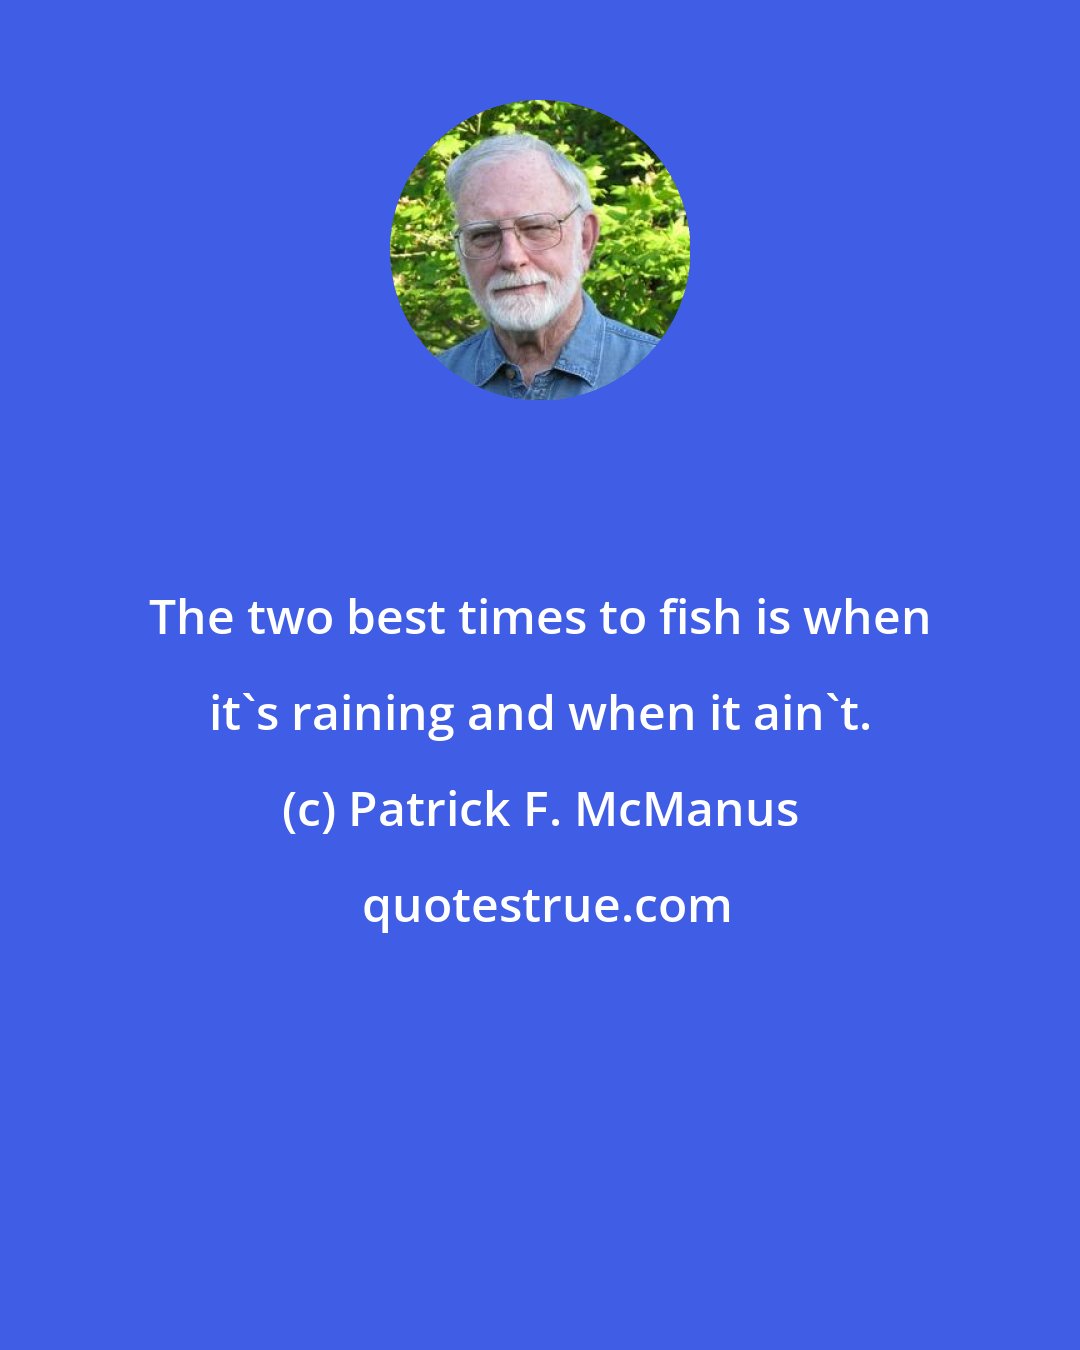 Patrick F. McManus: The two best times to fish is when it's raining and when it ain't.